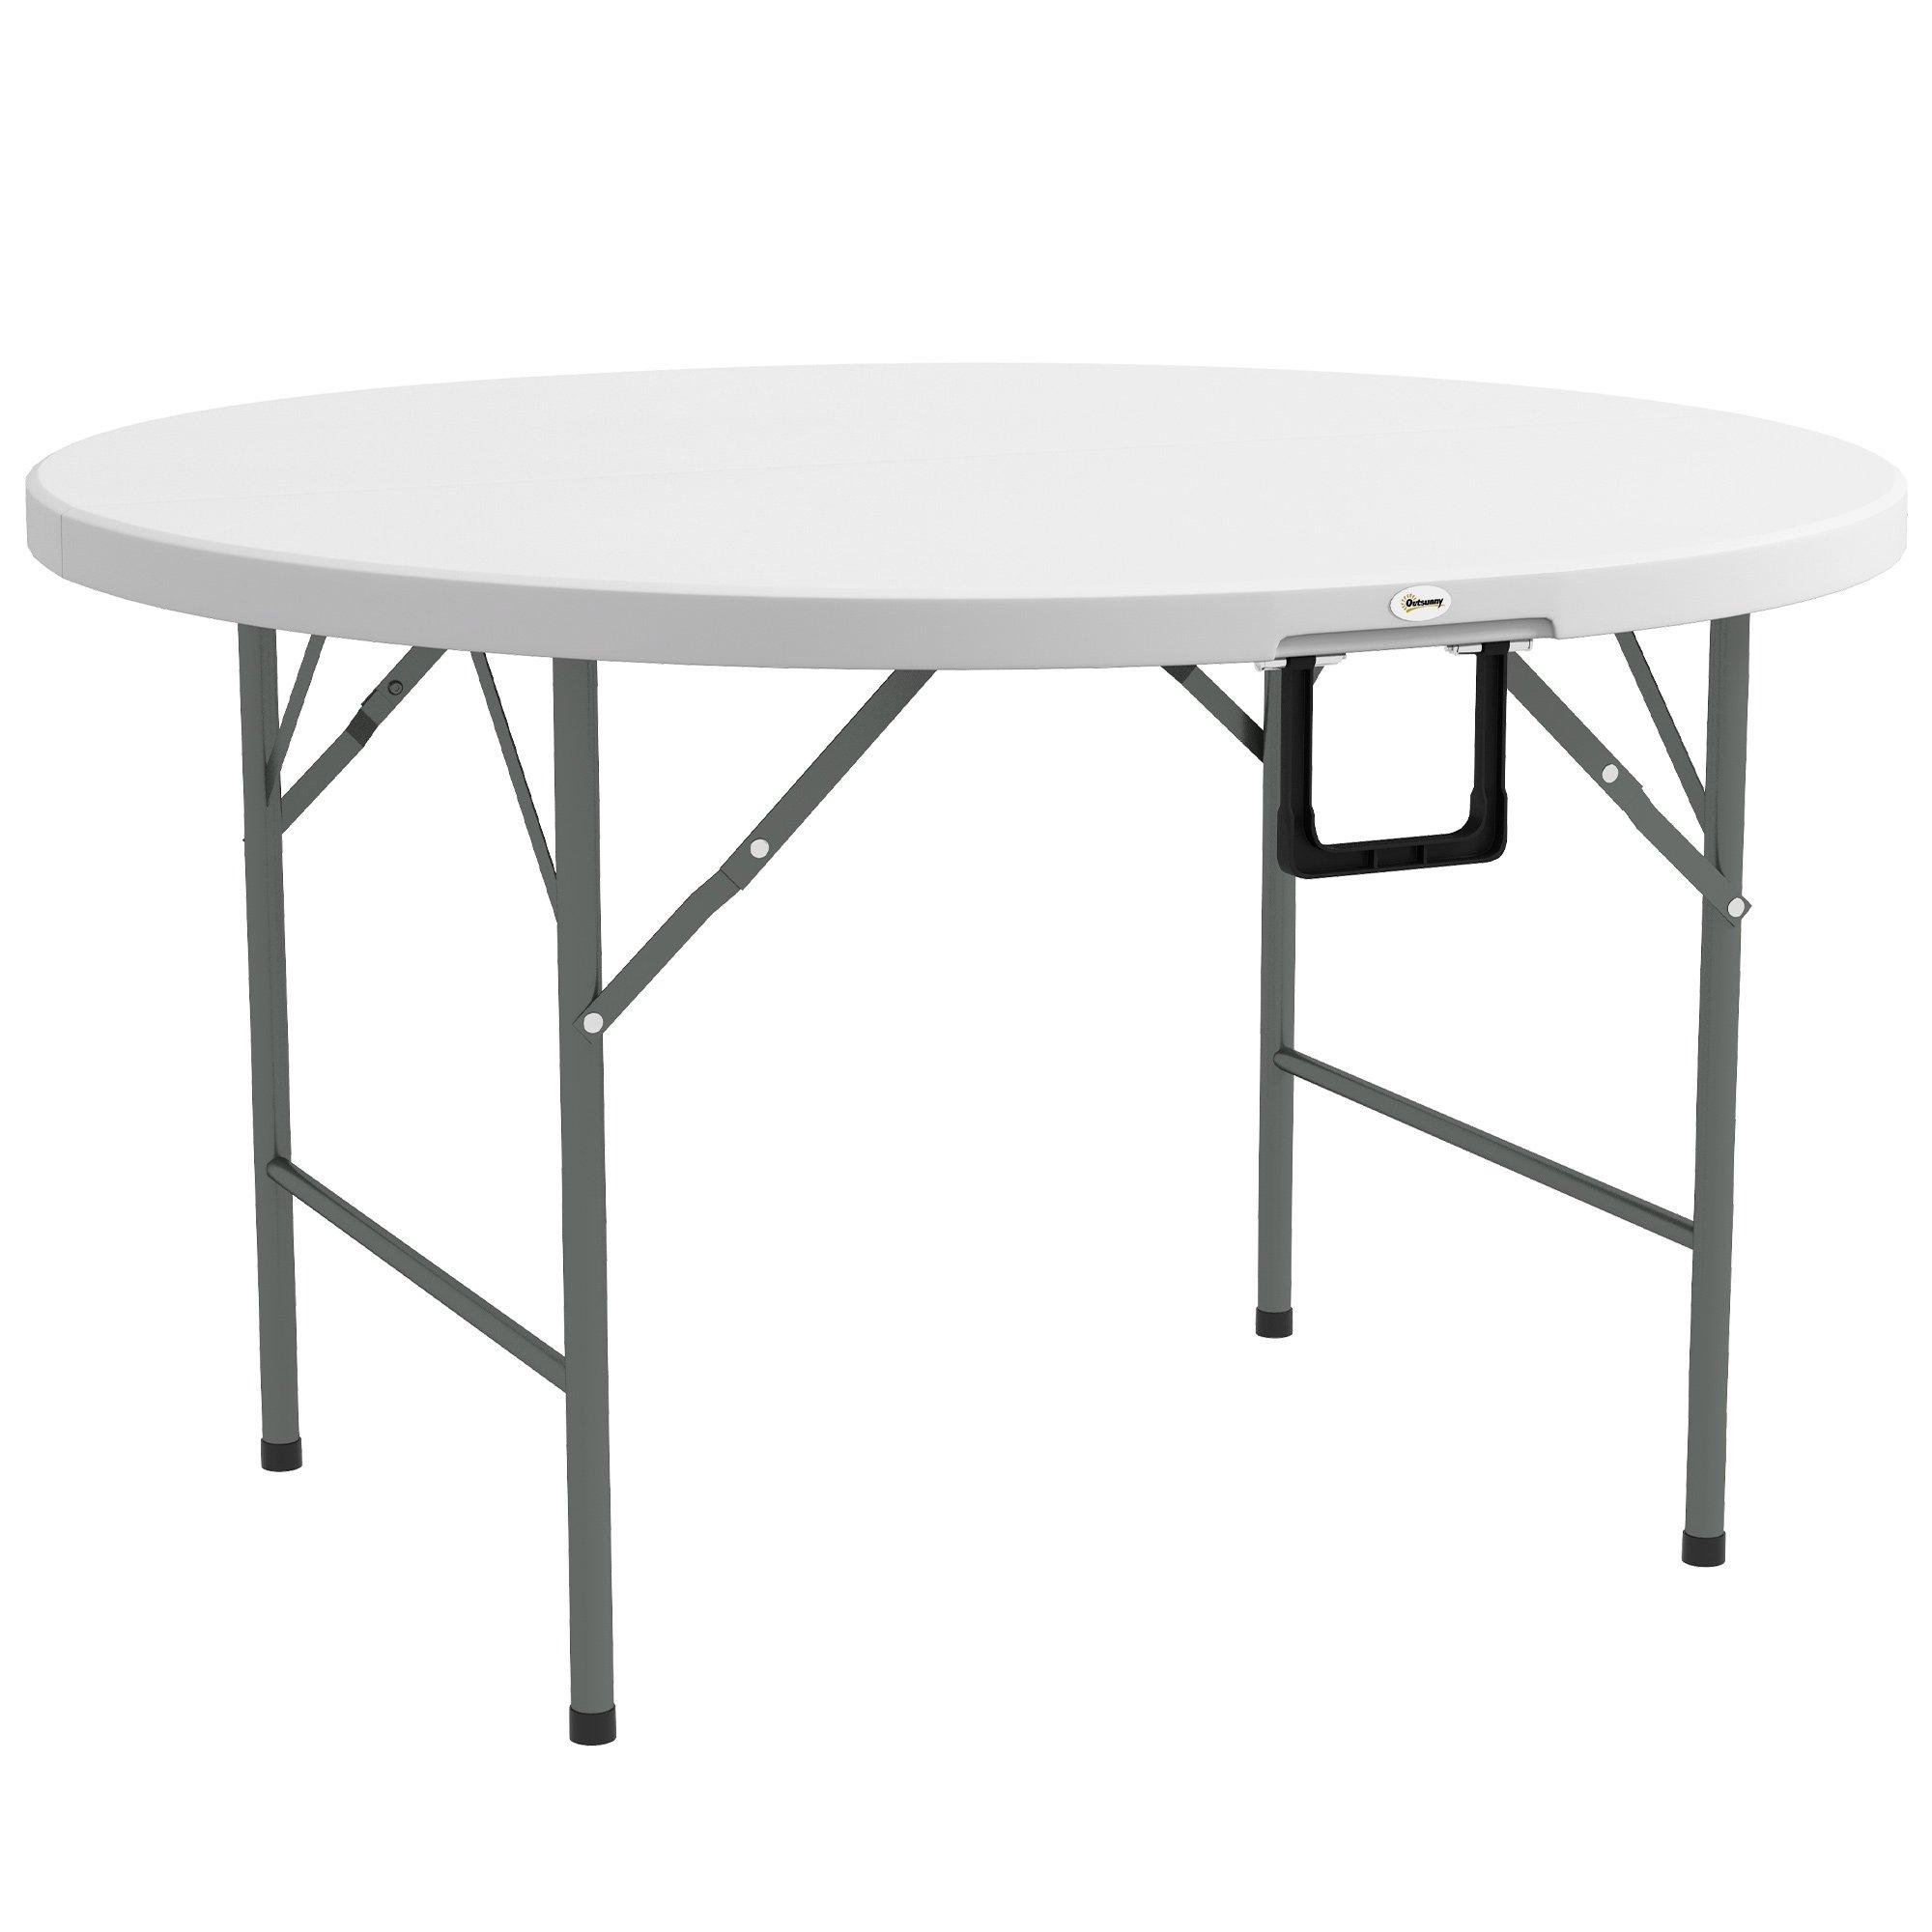 Folding Garden Table, HDPE Round Picnic Table for 6, White